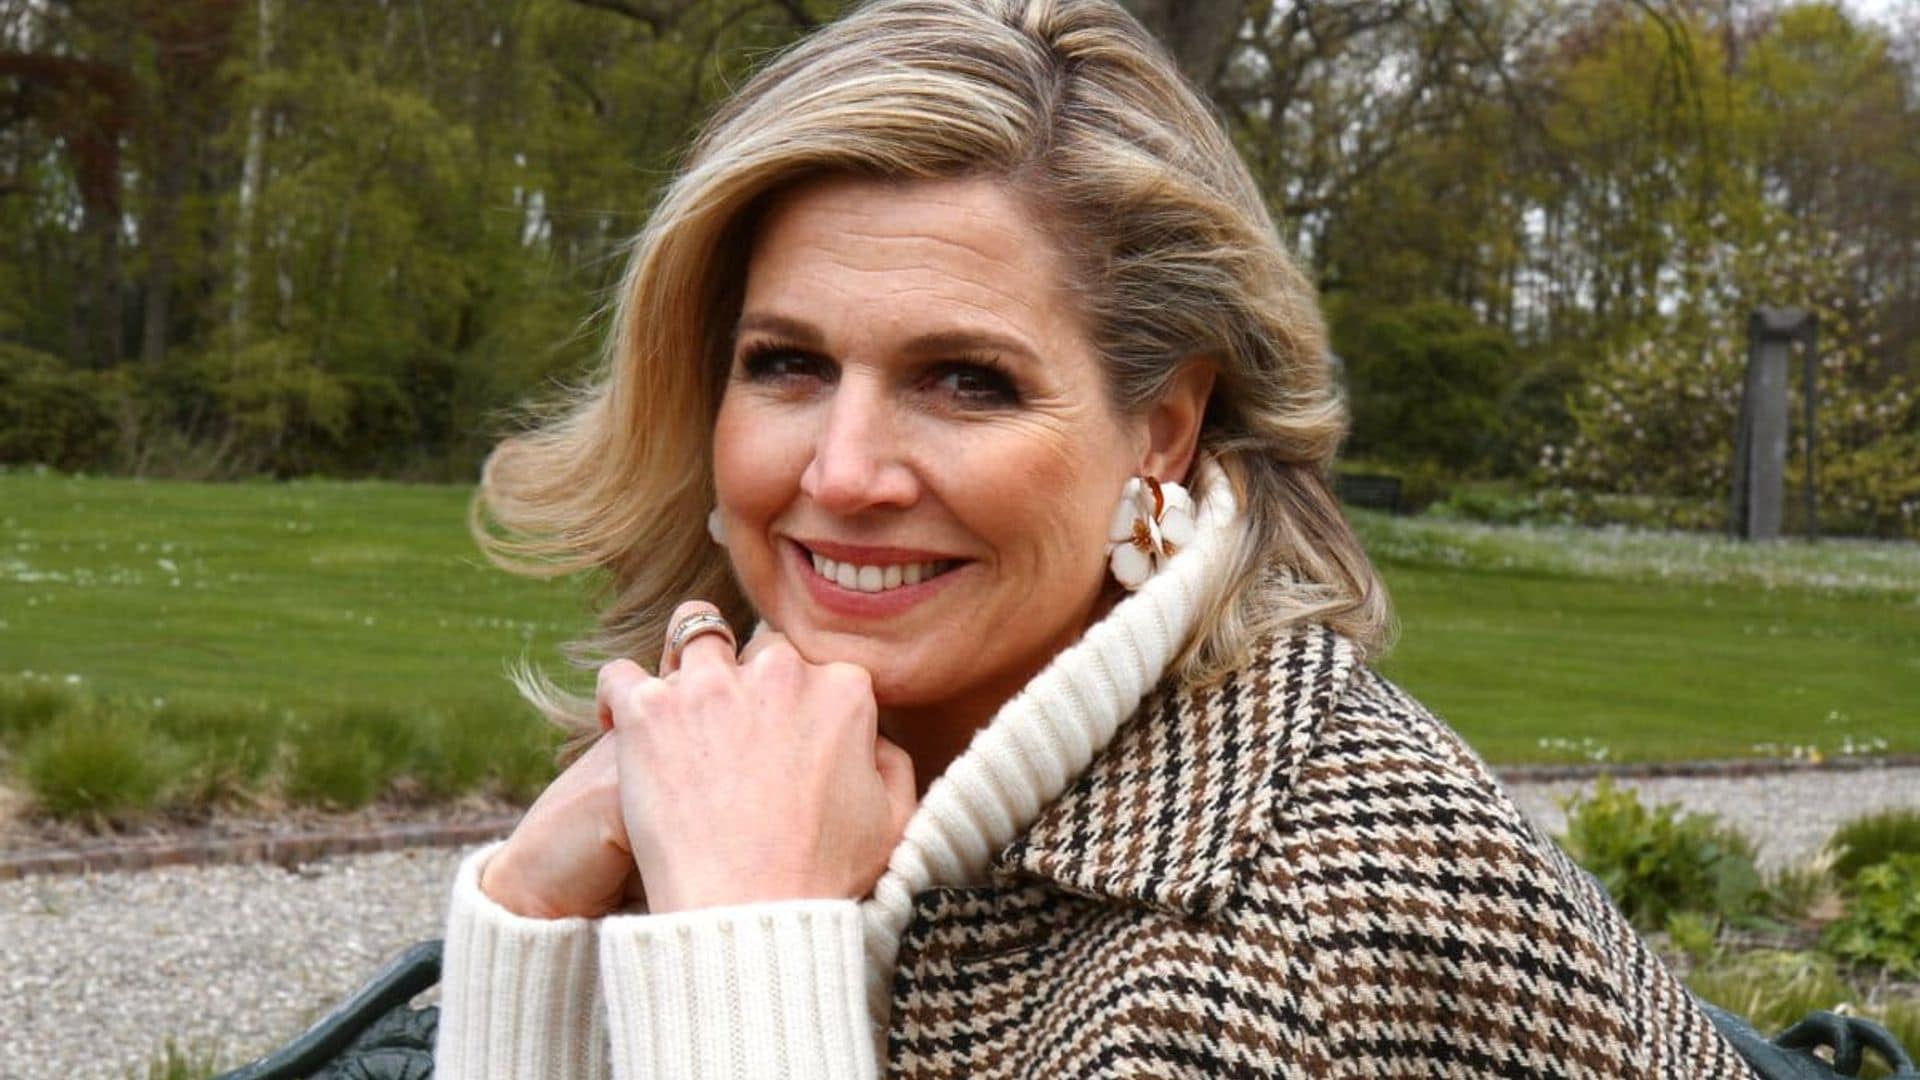 Queen Maxima's husband steps behind camera for her 50th birthday portraits